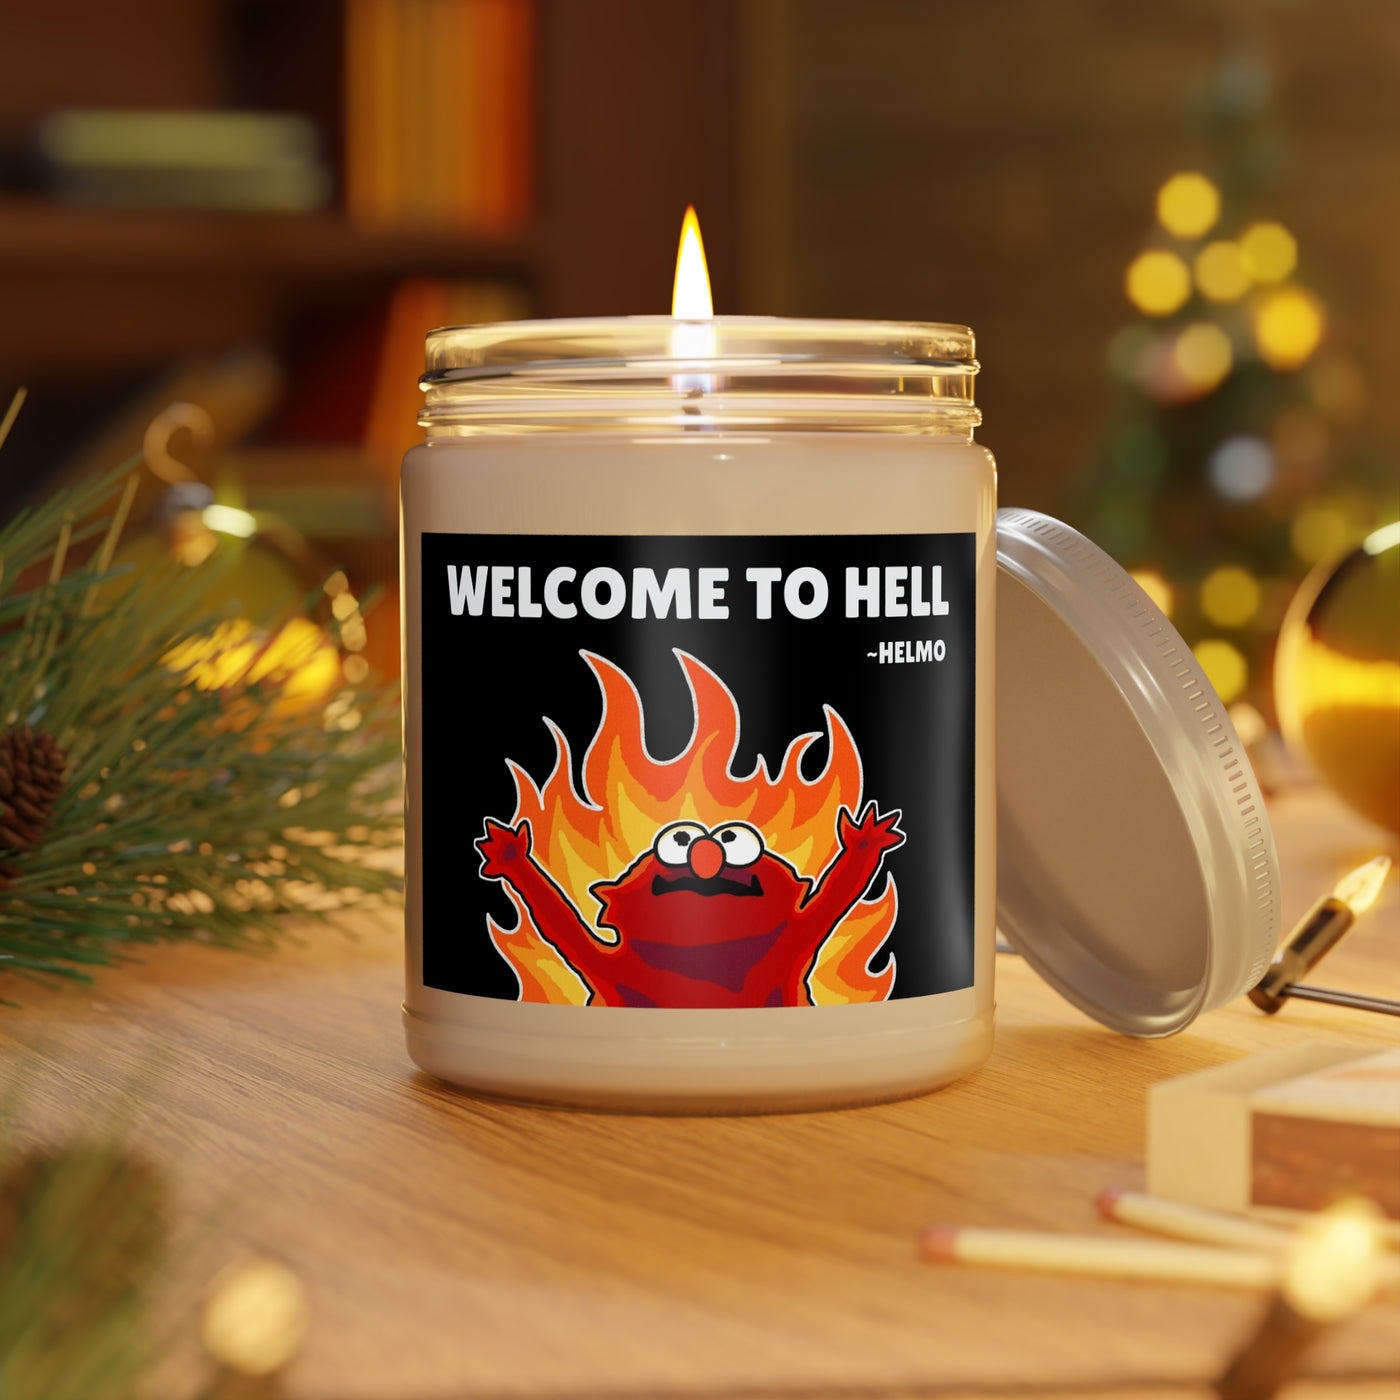 Welcome to Hell -Helmo